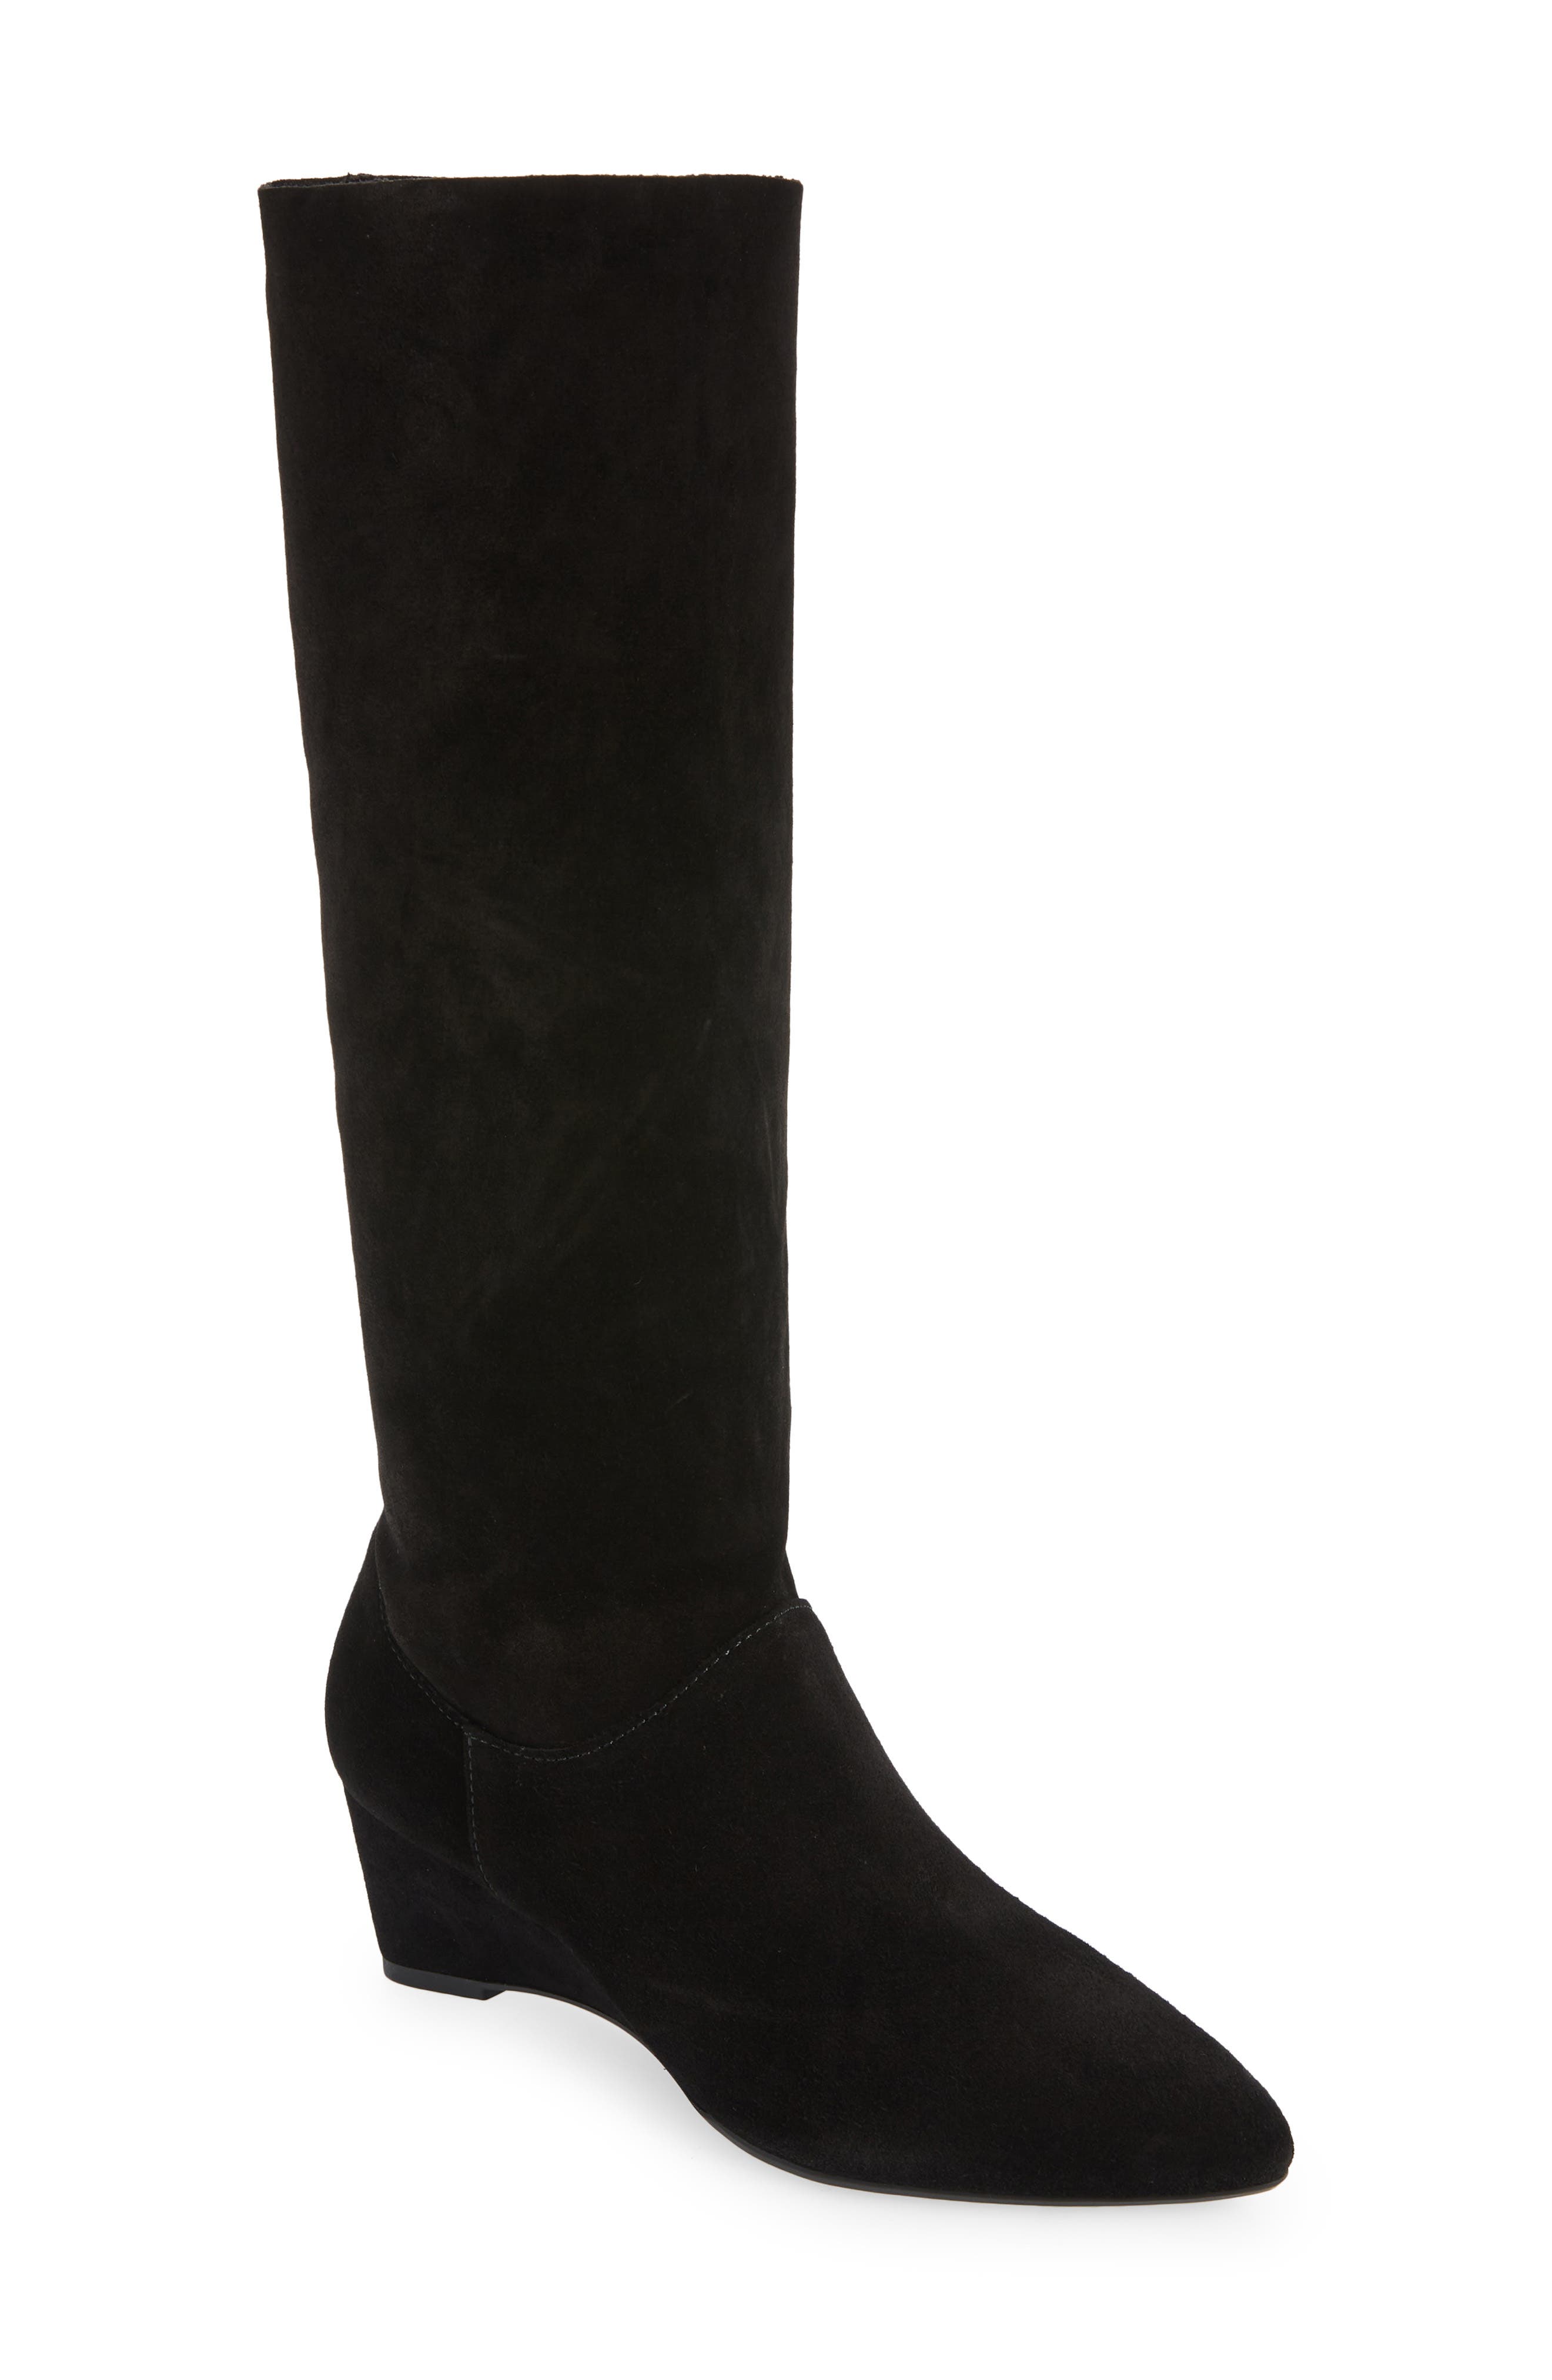 NEW LADIES WOMENS KNEE HIGH STYLE FASHION CASUAL WEDGE BOOTS SIZE 3 4 5 6 7 8 